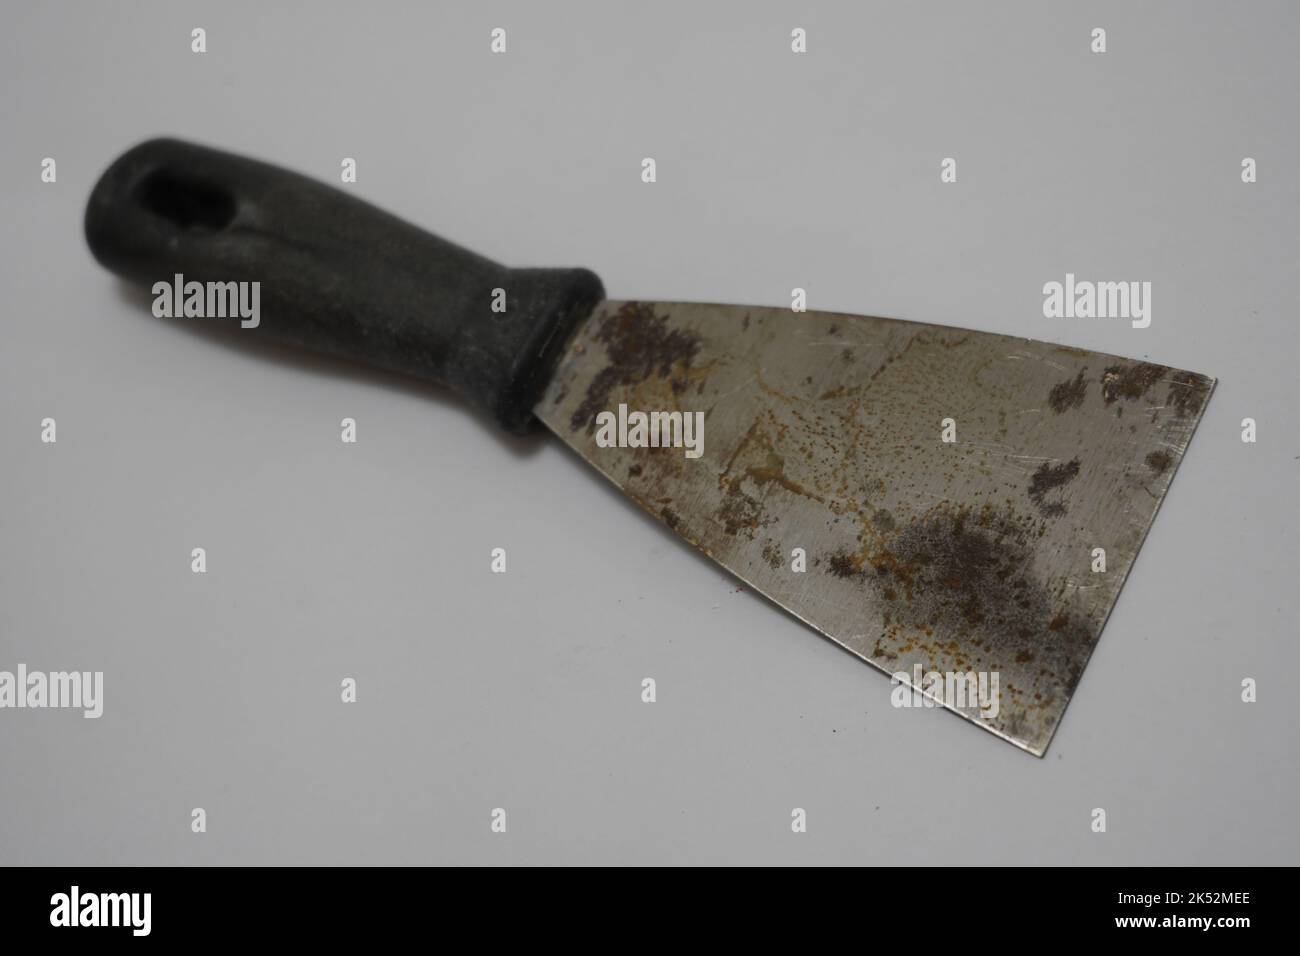 Work Tools Putty Knife Isolated On White Background Stock Photo - Download  Image Now - iStock